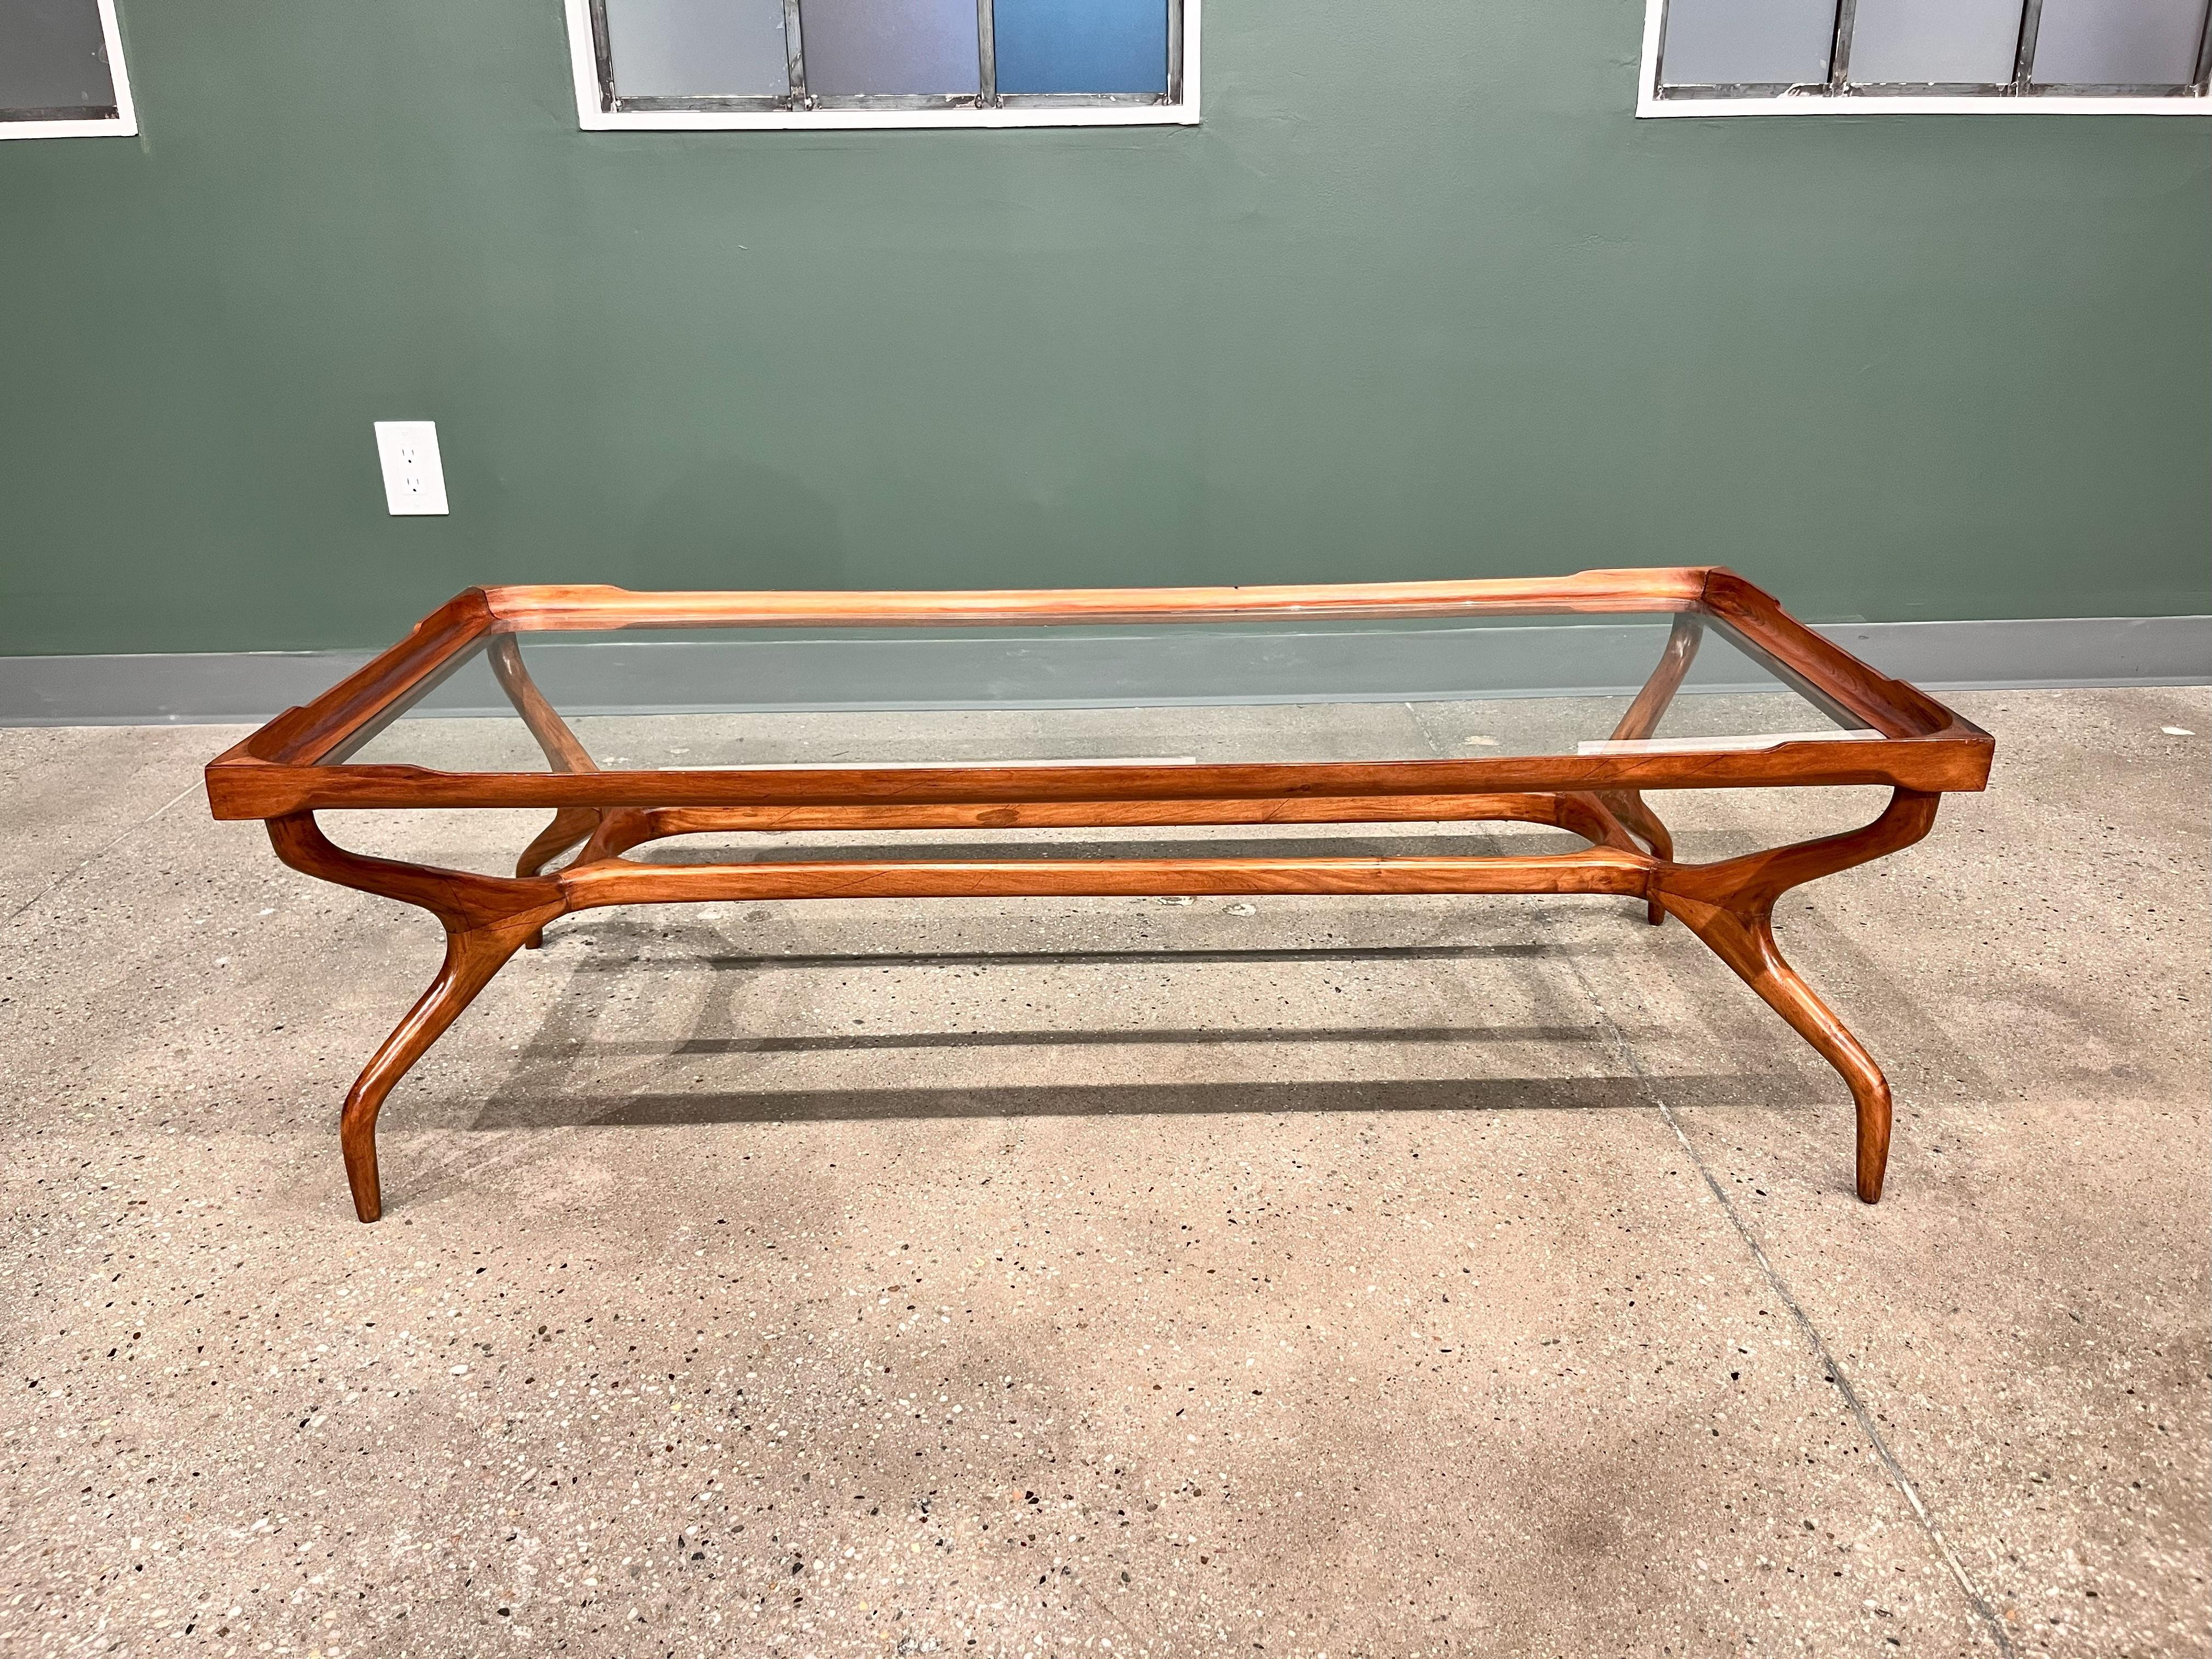 Mid-20th Century Brazilian Modern Coffee Table in Hardwood & Glass, Giuseppe Scapinelli 1950s For Sale